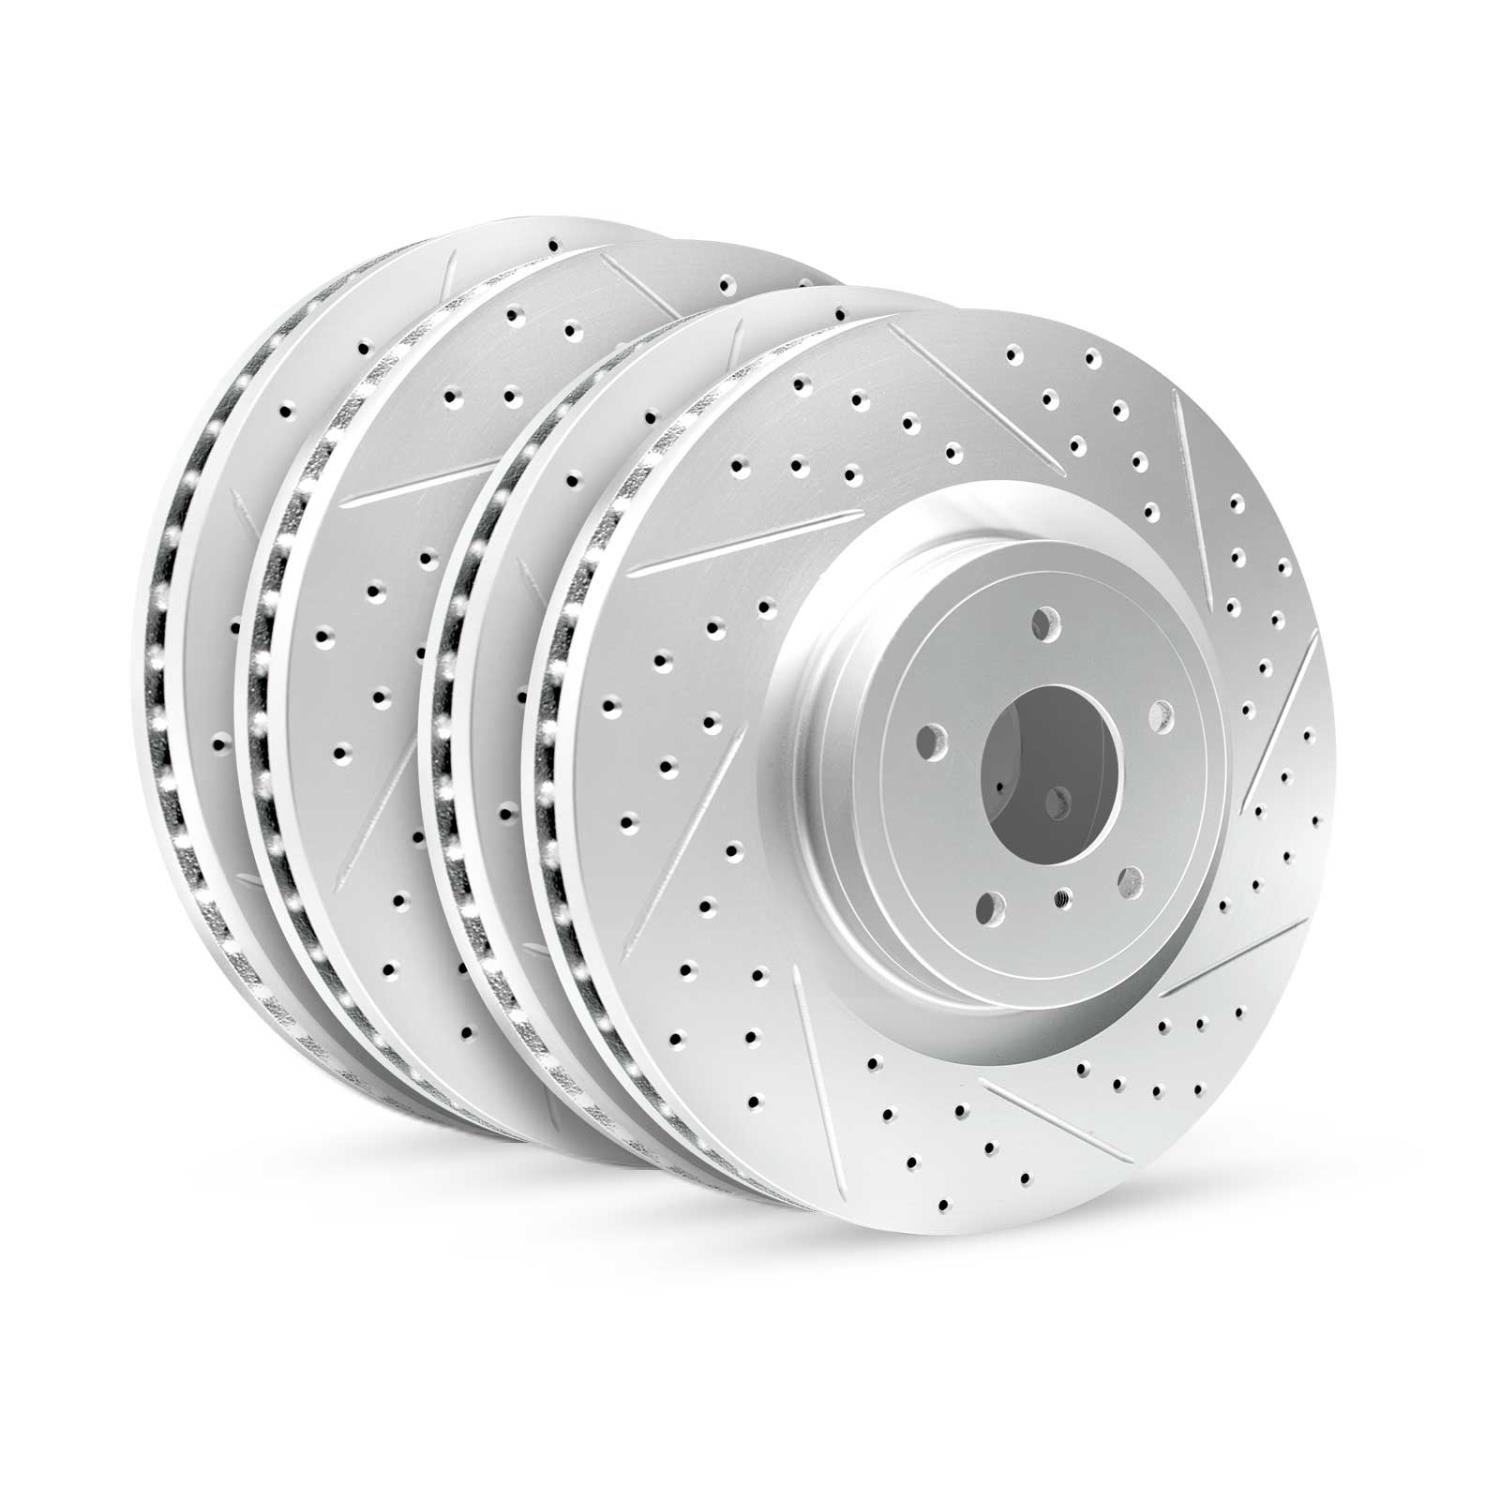 GEO-Carbon Drilled/Slotted Rotors, 2005-2012 Acura/Honda, Position: Front/Rear